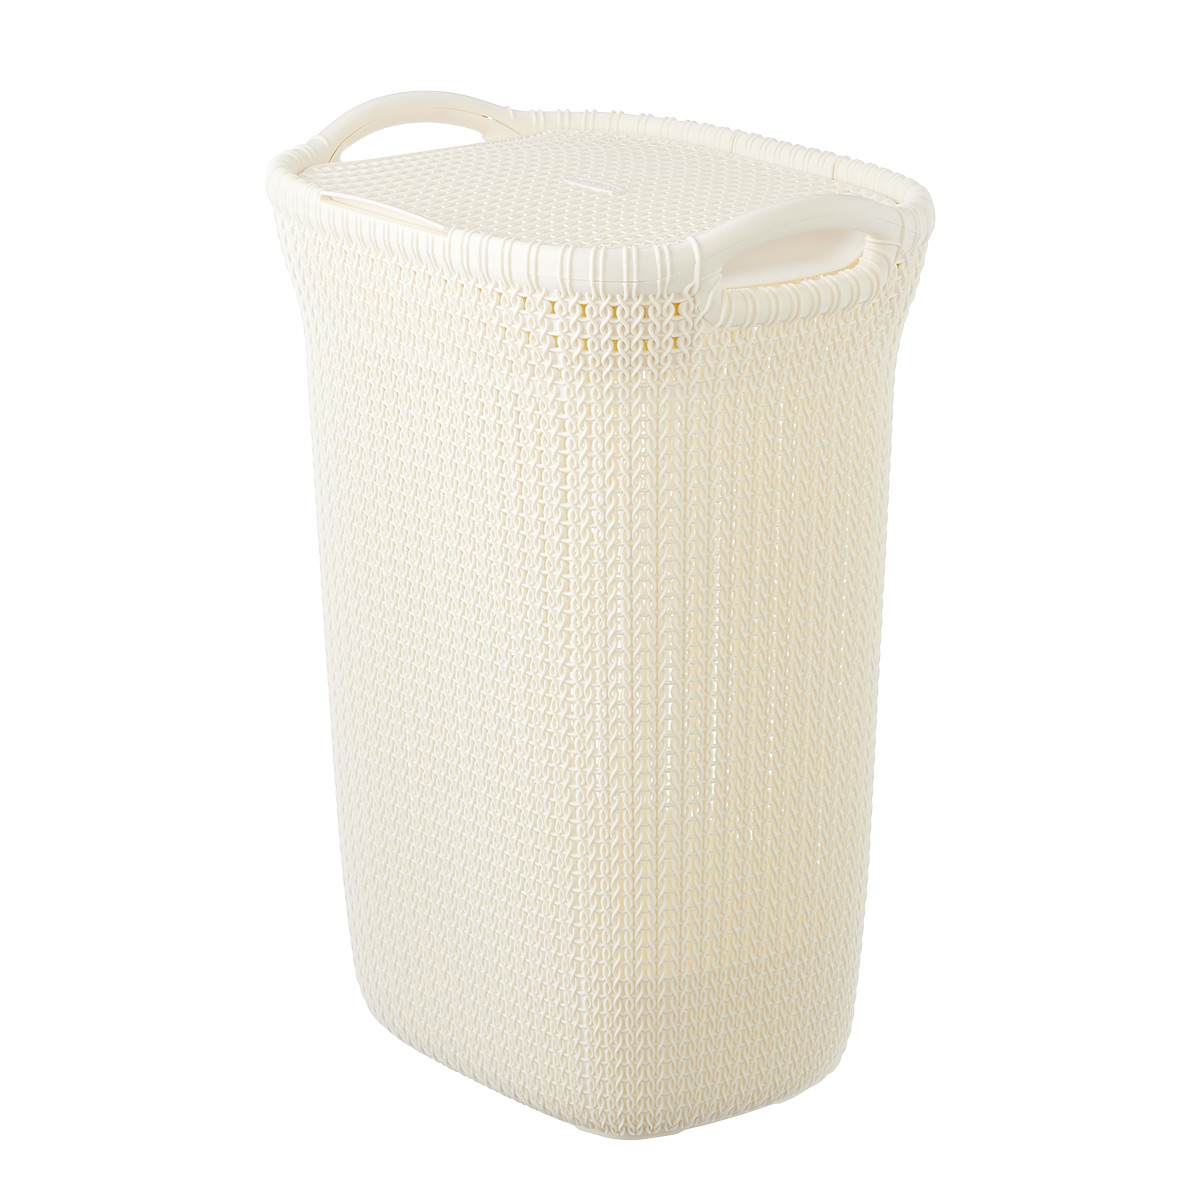 Curver Cream Knit Laundry Hamper | The Container Store